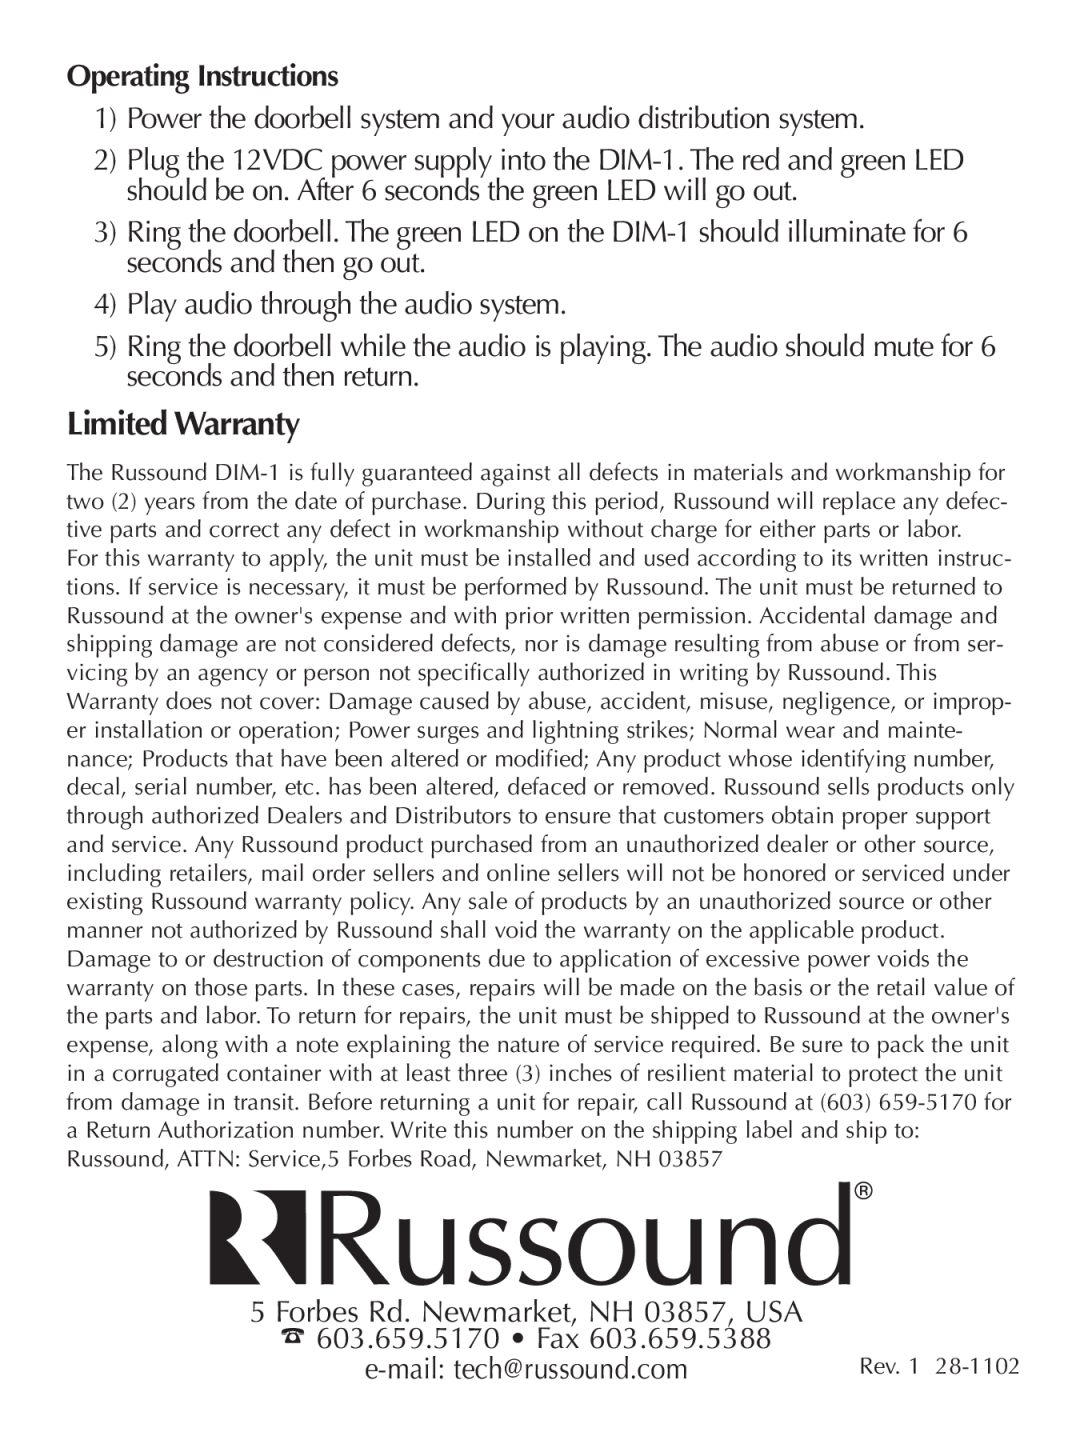 Russound DIM-1 Limited Warranty, Operating Instructions, 4Play audio through the audio system, 603.659.5170 Fax 